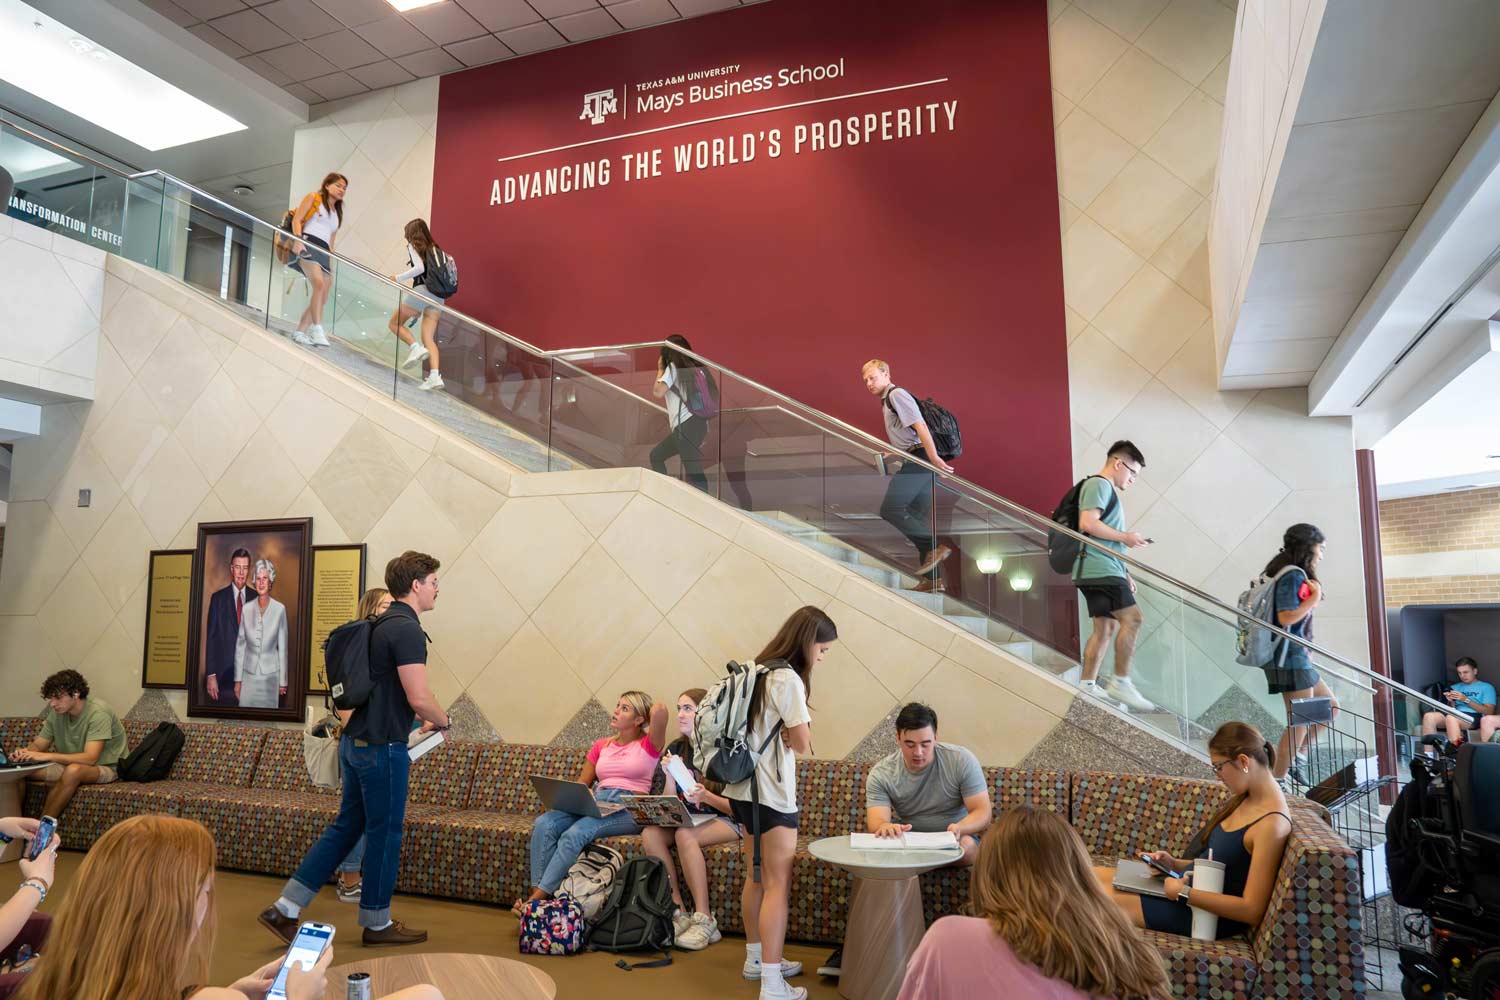 Students work on assignments and collaborate in the study spaces of the Wehner building on Texas A&M's west campus